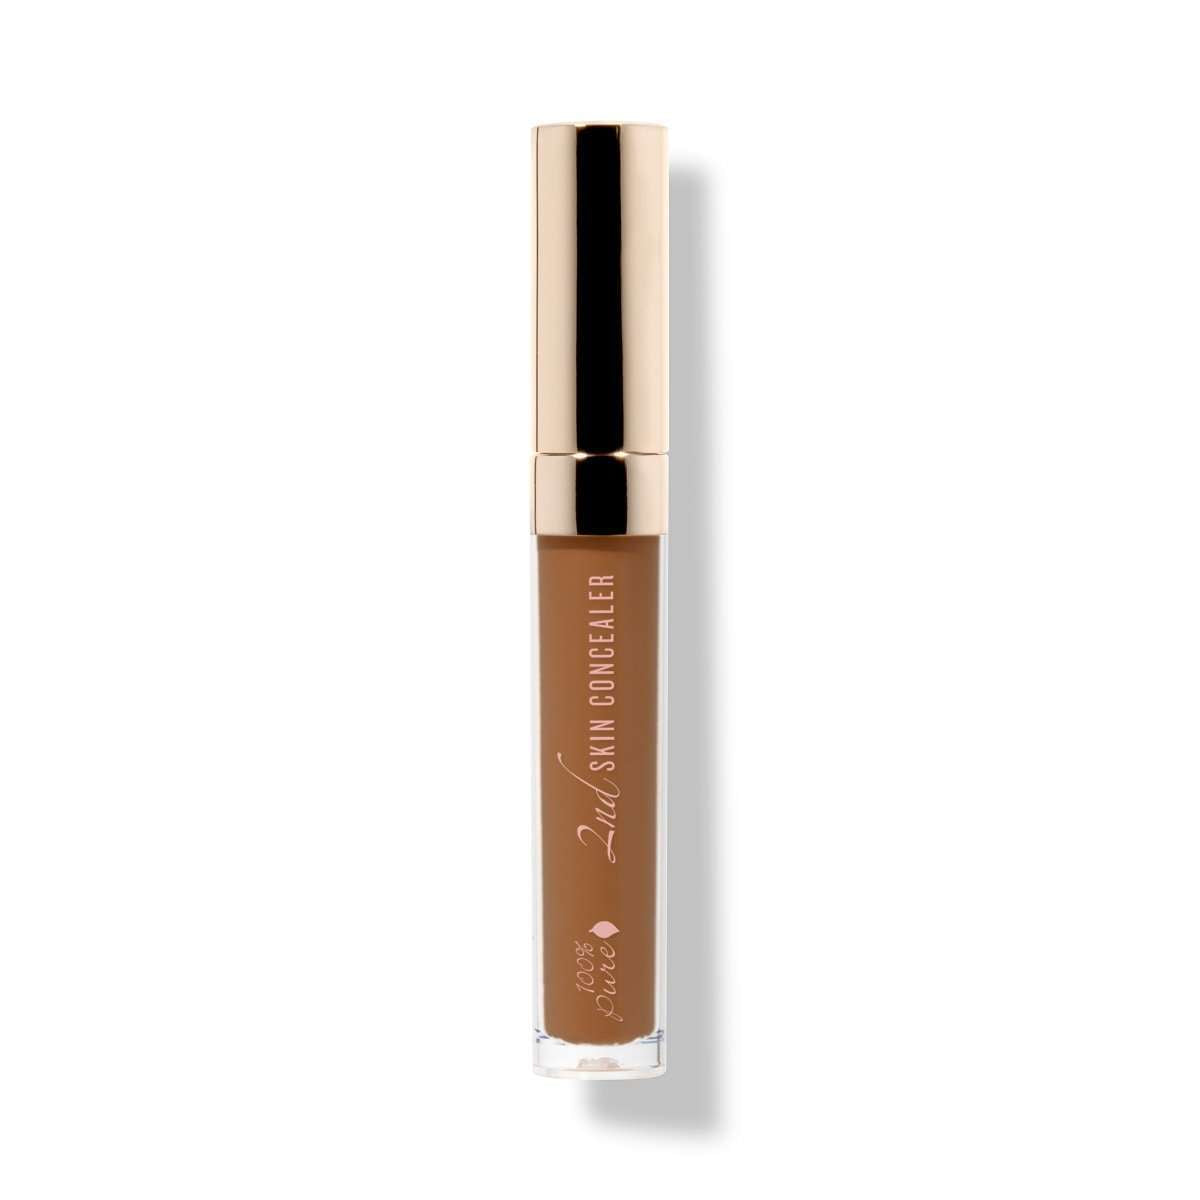 100% Pure® Fruit Pigmented® 2nd Skin Concealer, Shade 7